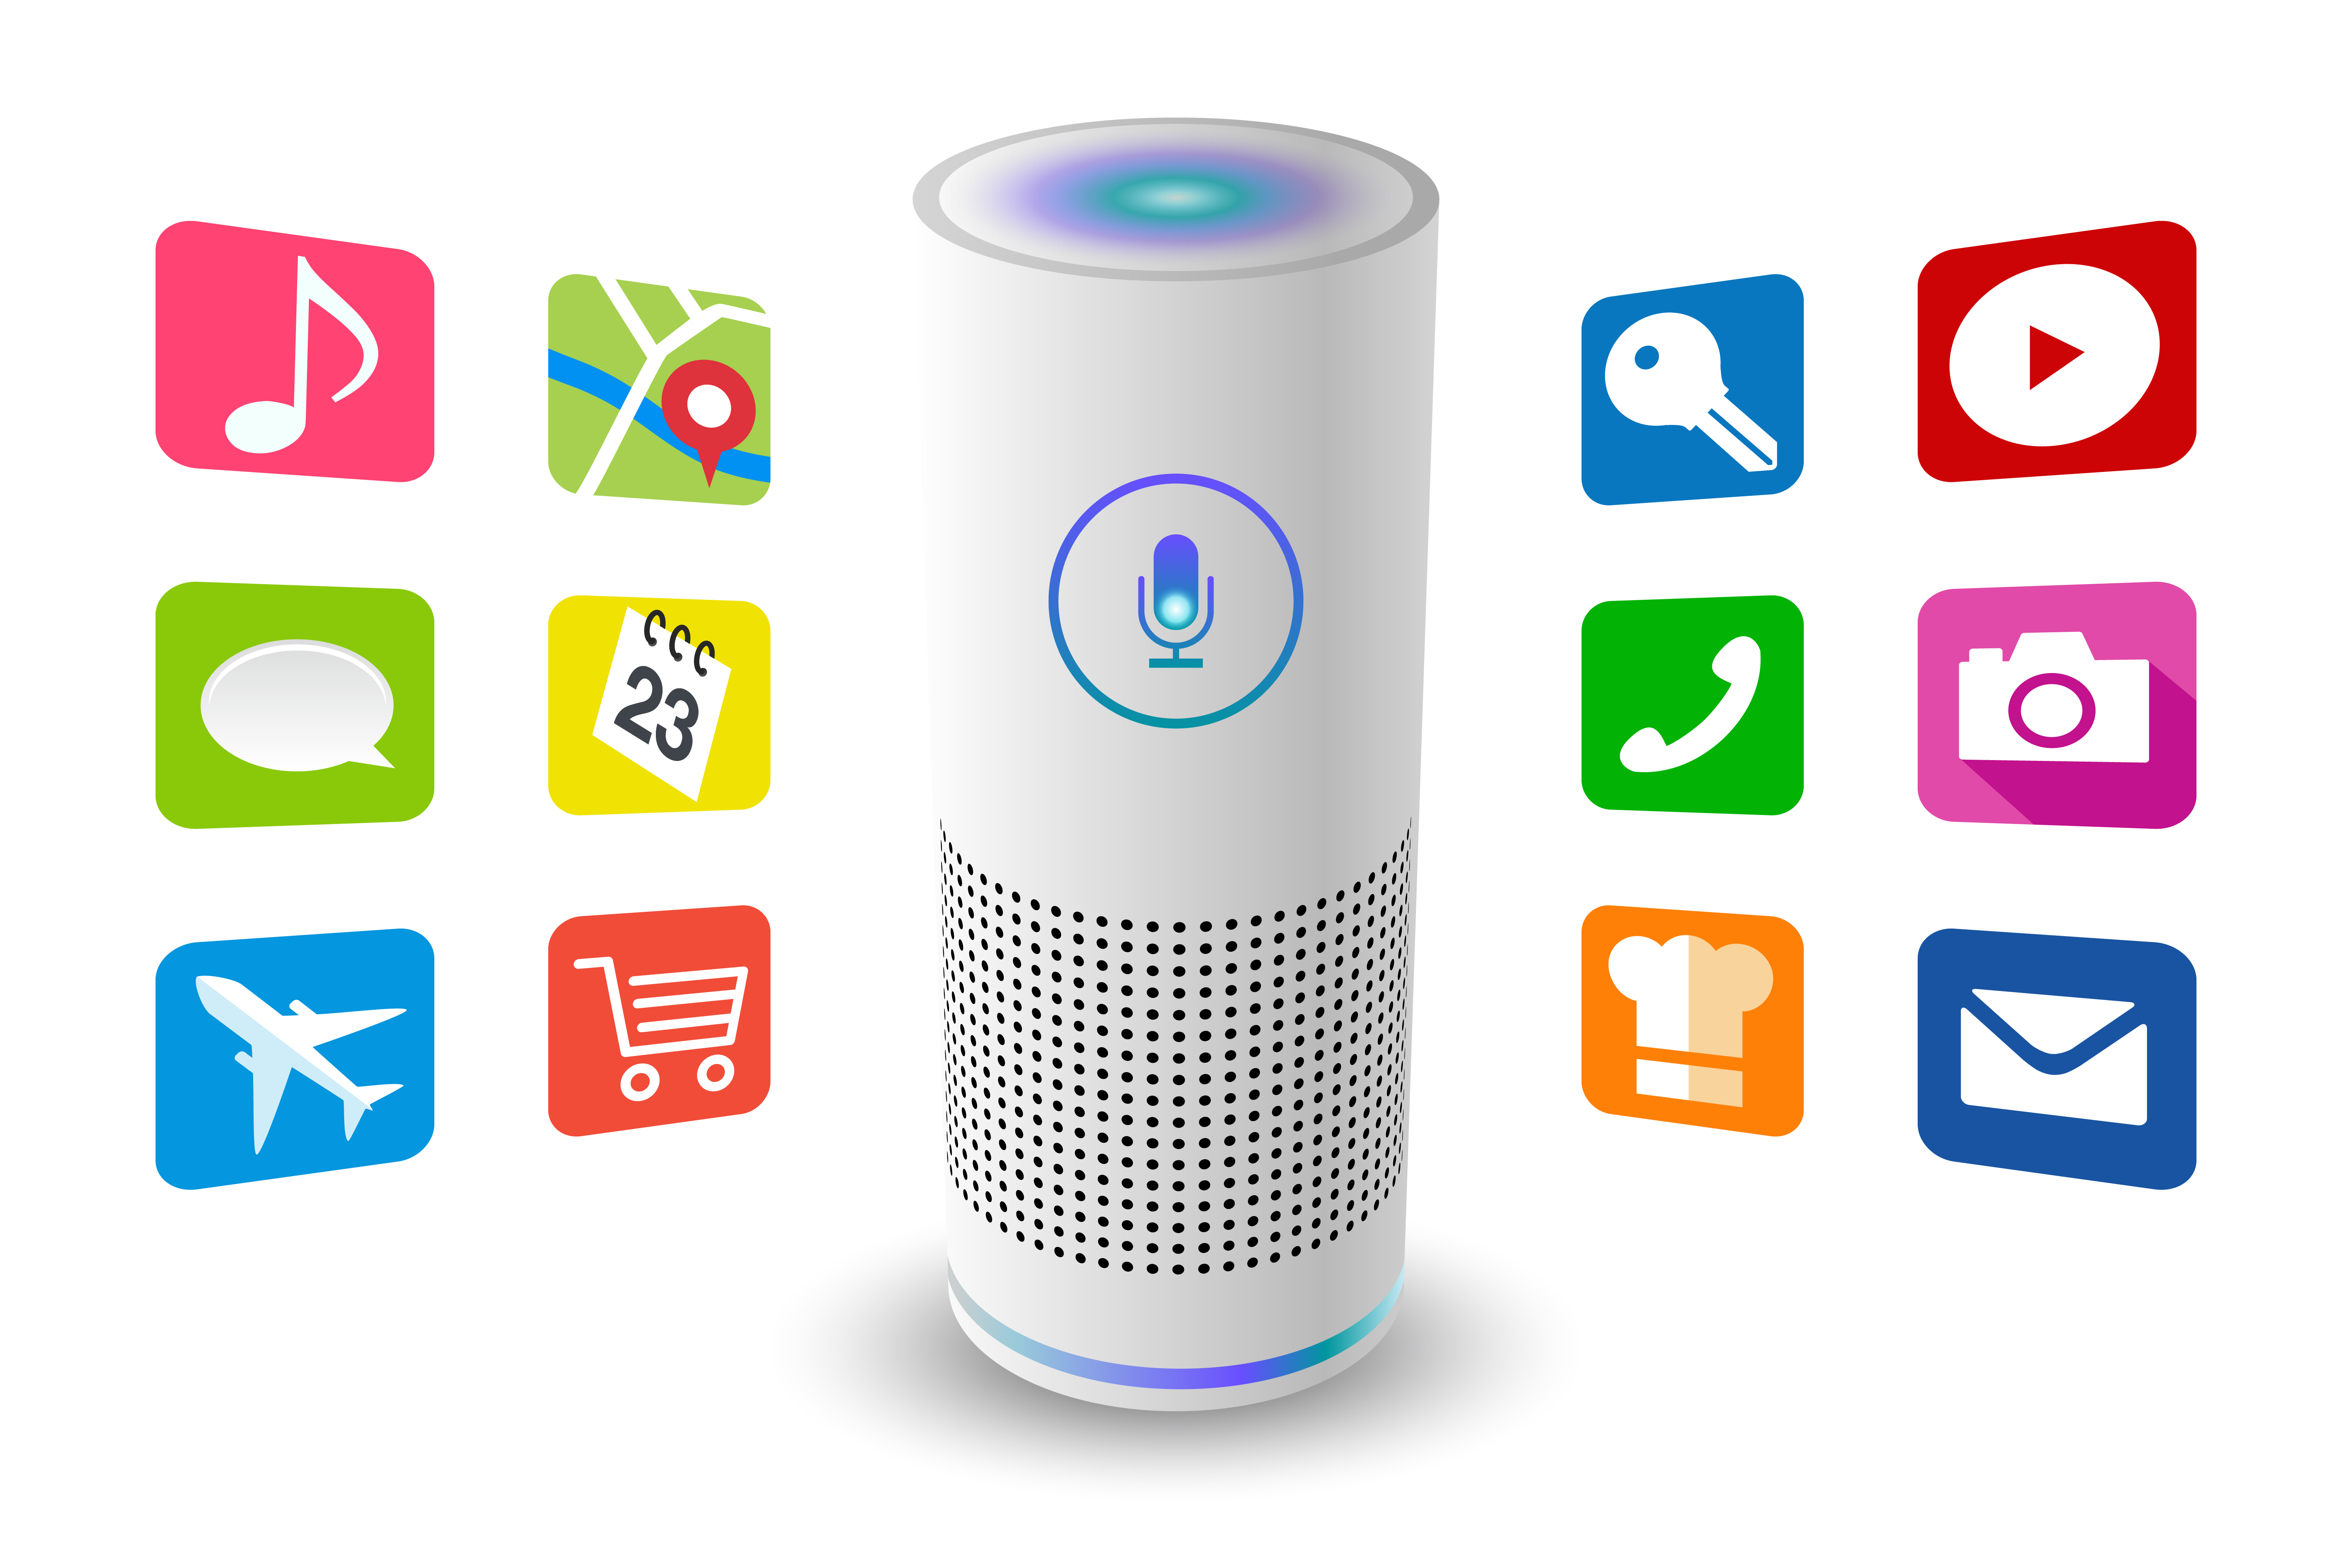 Smart speaker for voice-first platforms with icons describing services and functions offered through these platforms